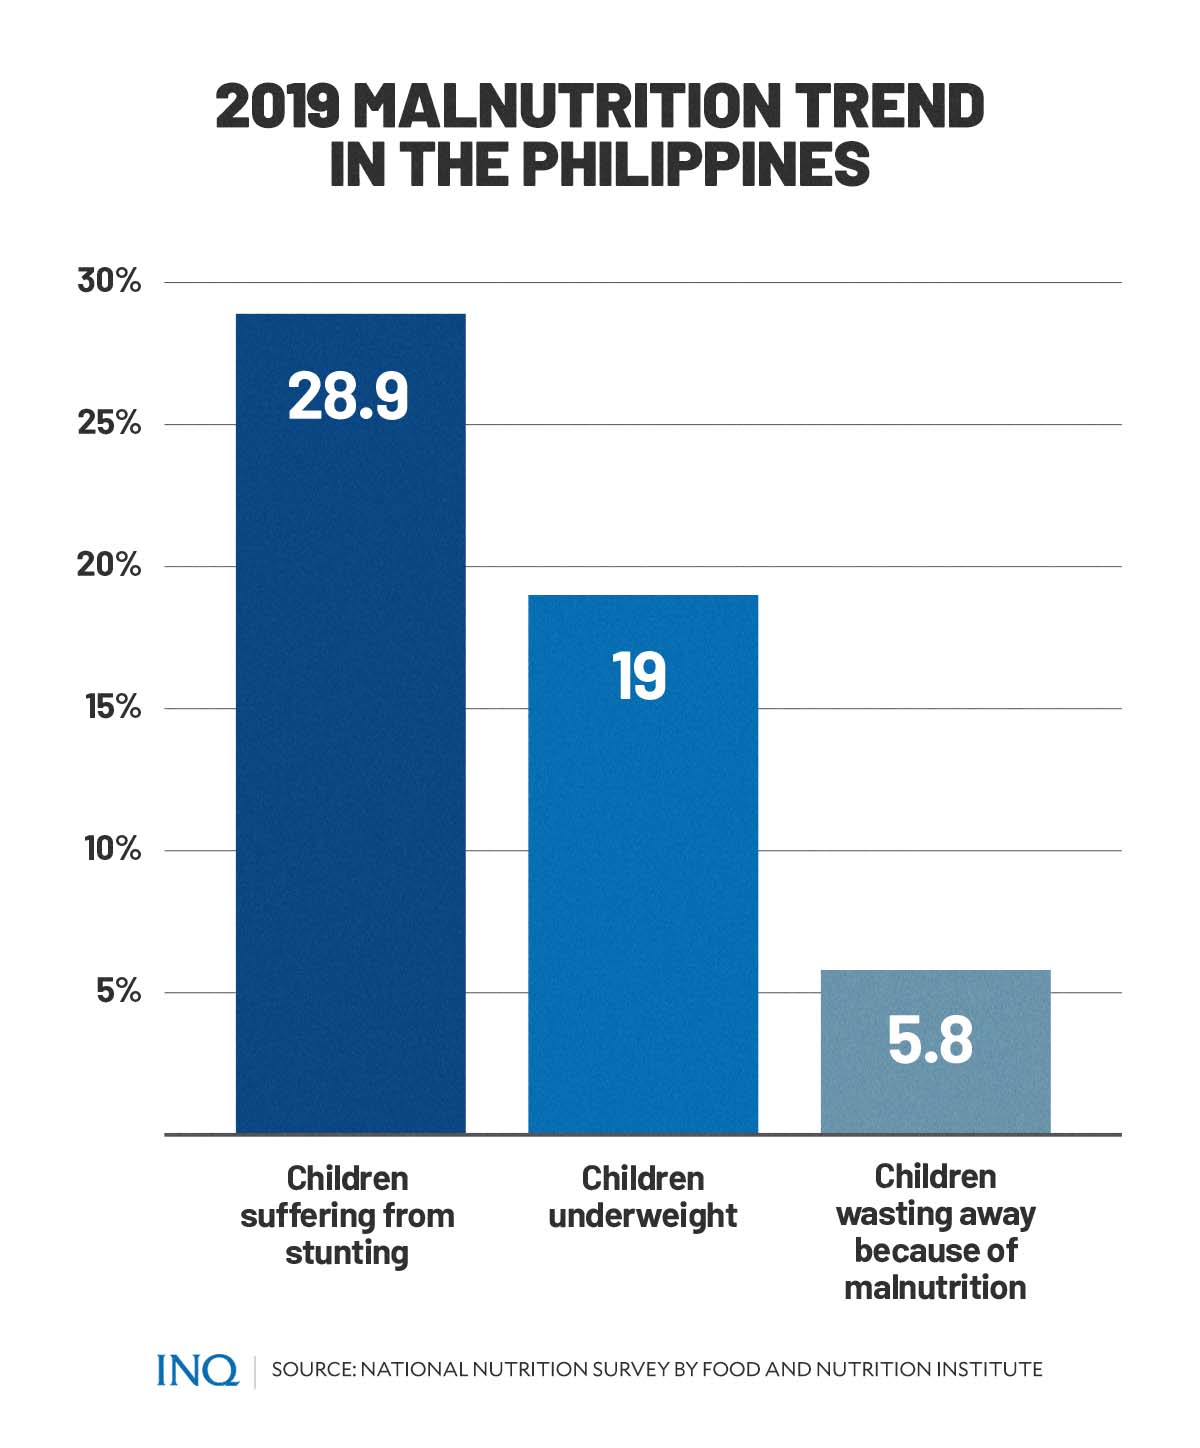 2019 malnutrition trend in the Philippines